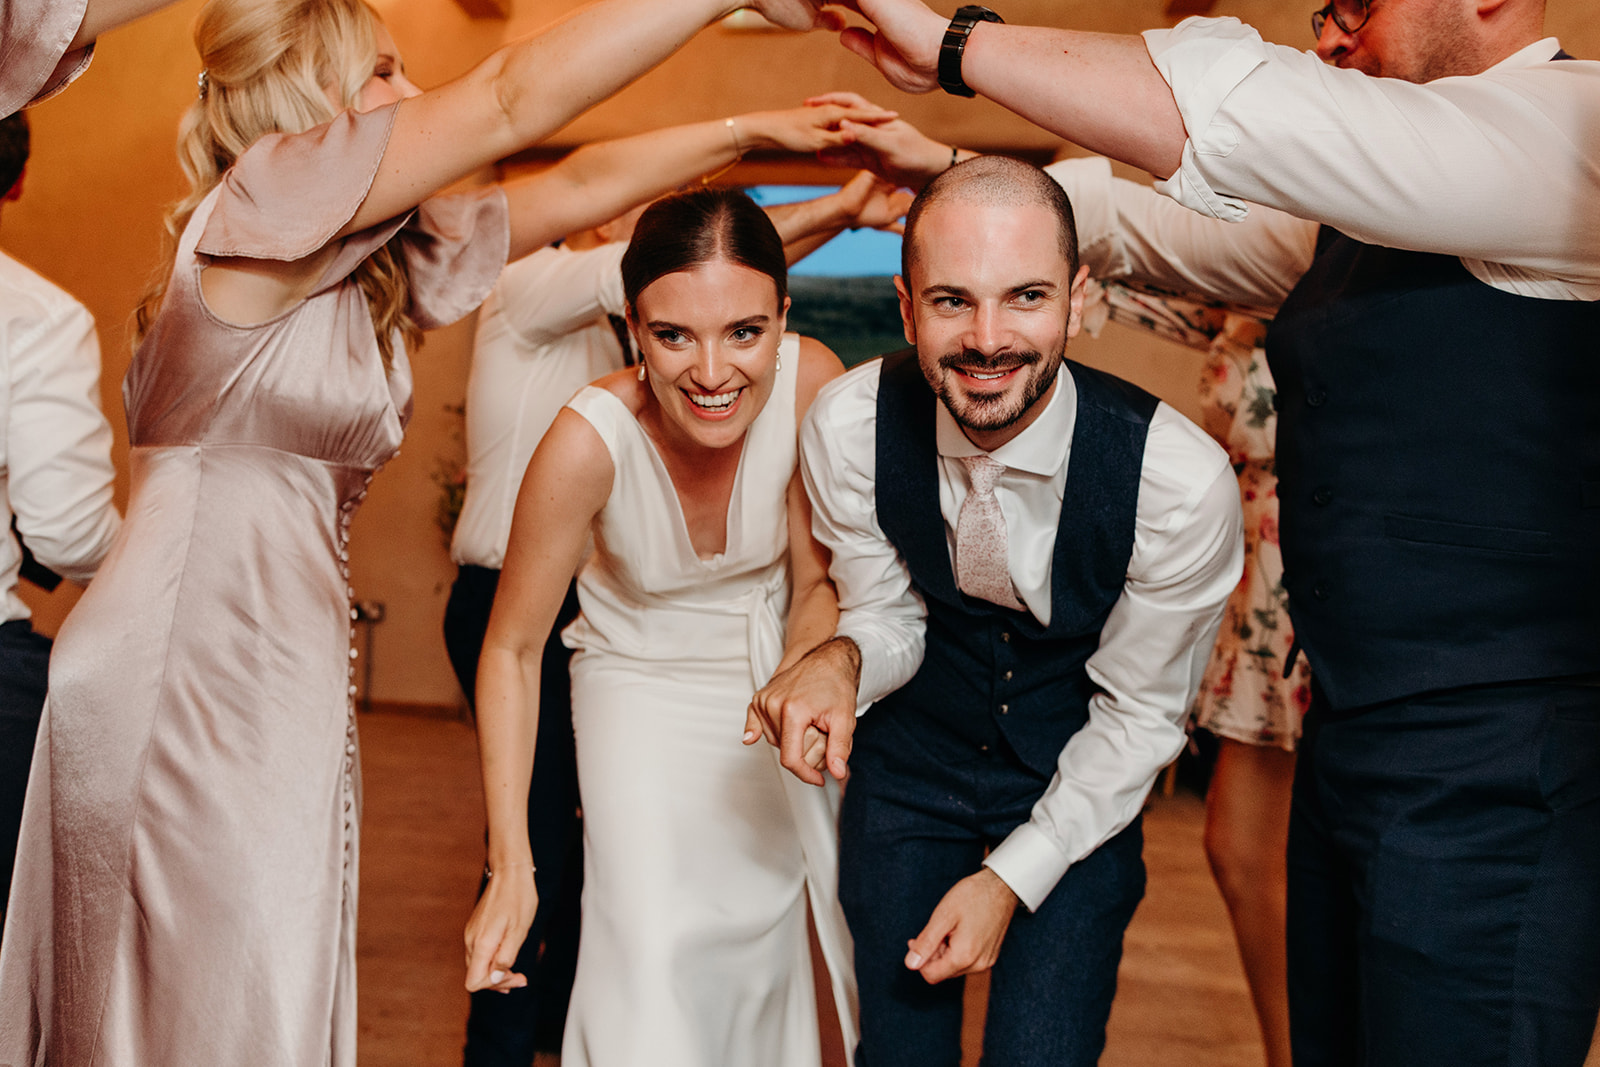 Ceilidh dance at wedding, bride and groom go under guests arms